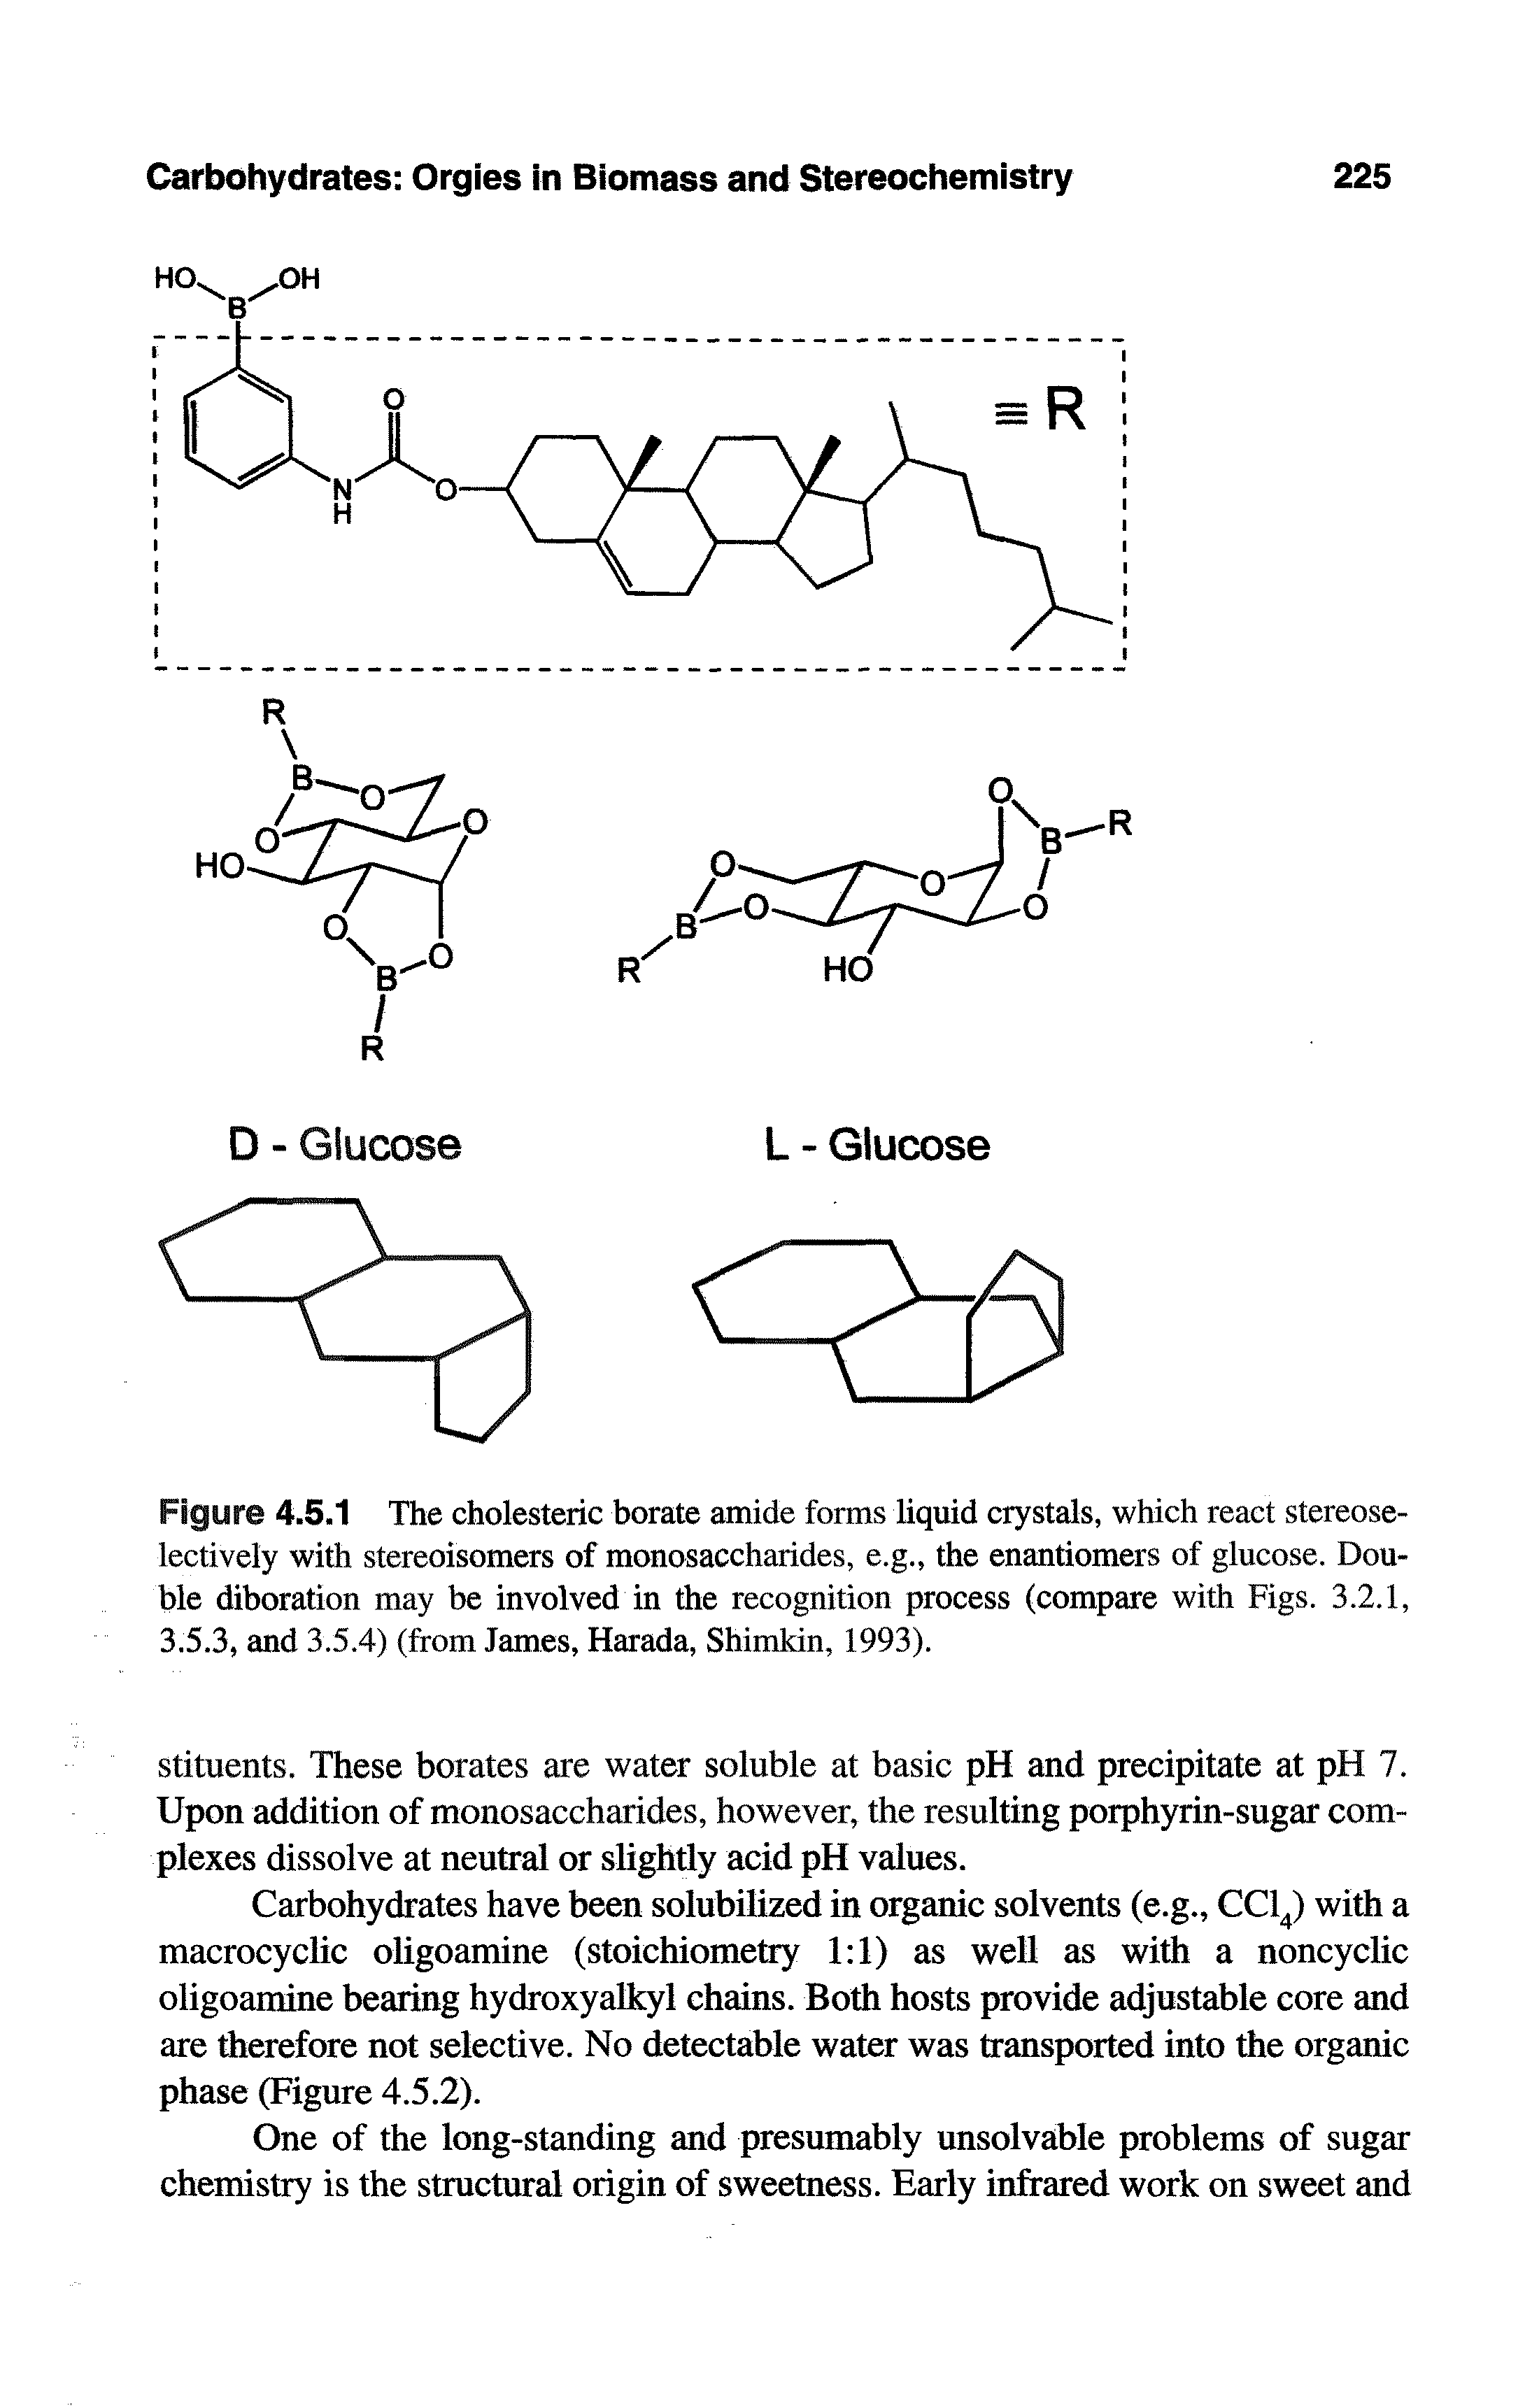 Figure 4.5.1 The cholesteric borate amide forms liquid crystals, which react stereose-lectively with stereoisomers of monosaccharides, e.g., the enantiomers of glucose. Double diboration may be involved in the recognition process (compare with Figs. 3.2.1, 3.5.3, and 3.5.4) (from James, Harada, Shimkin, 1993).